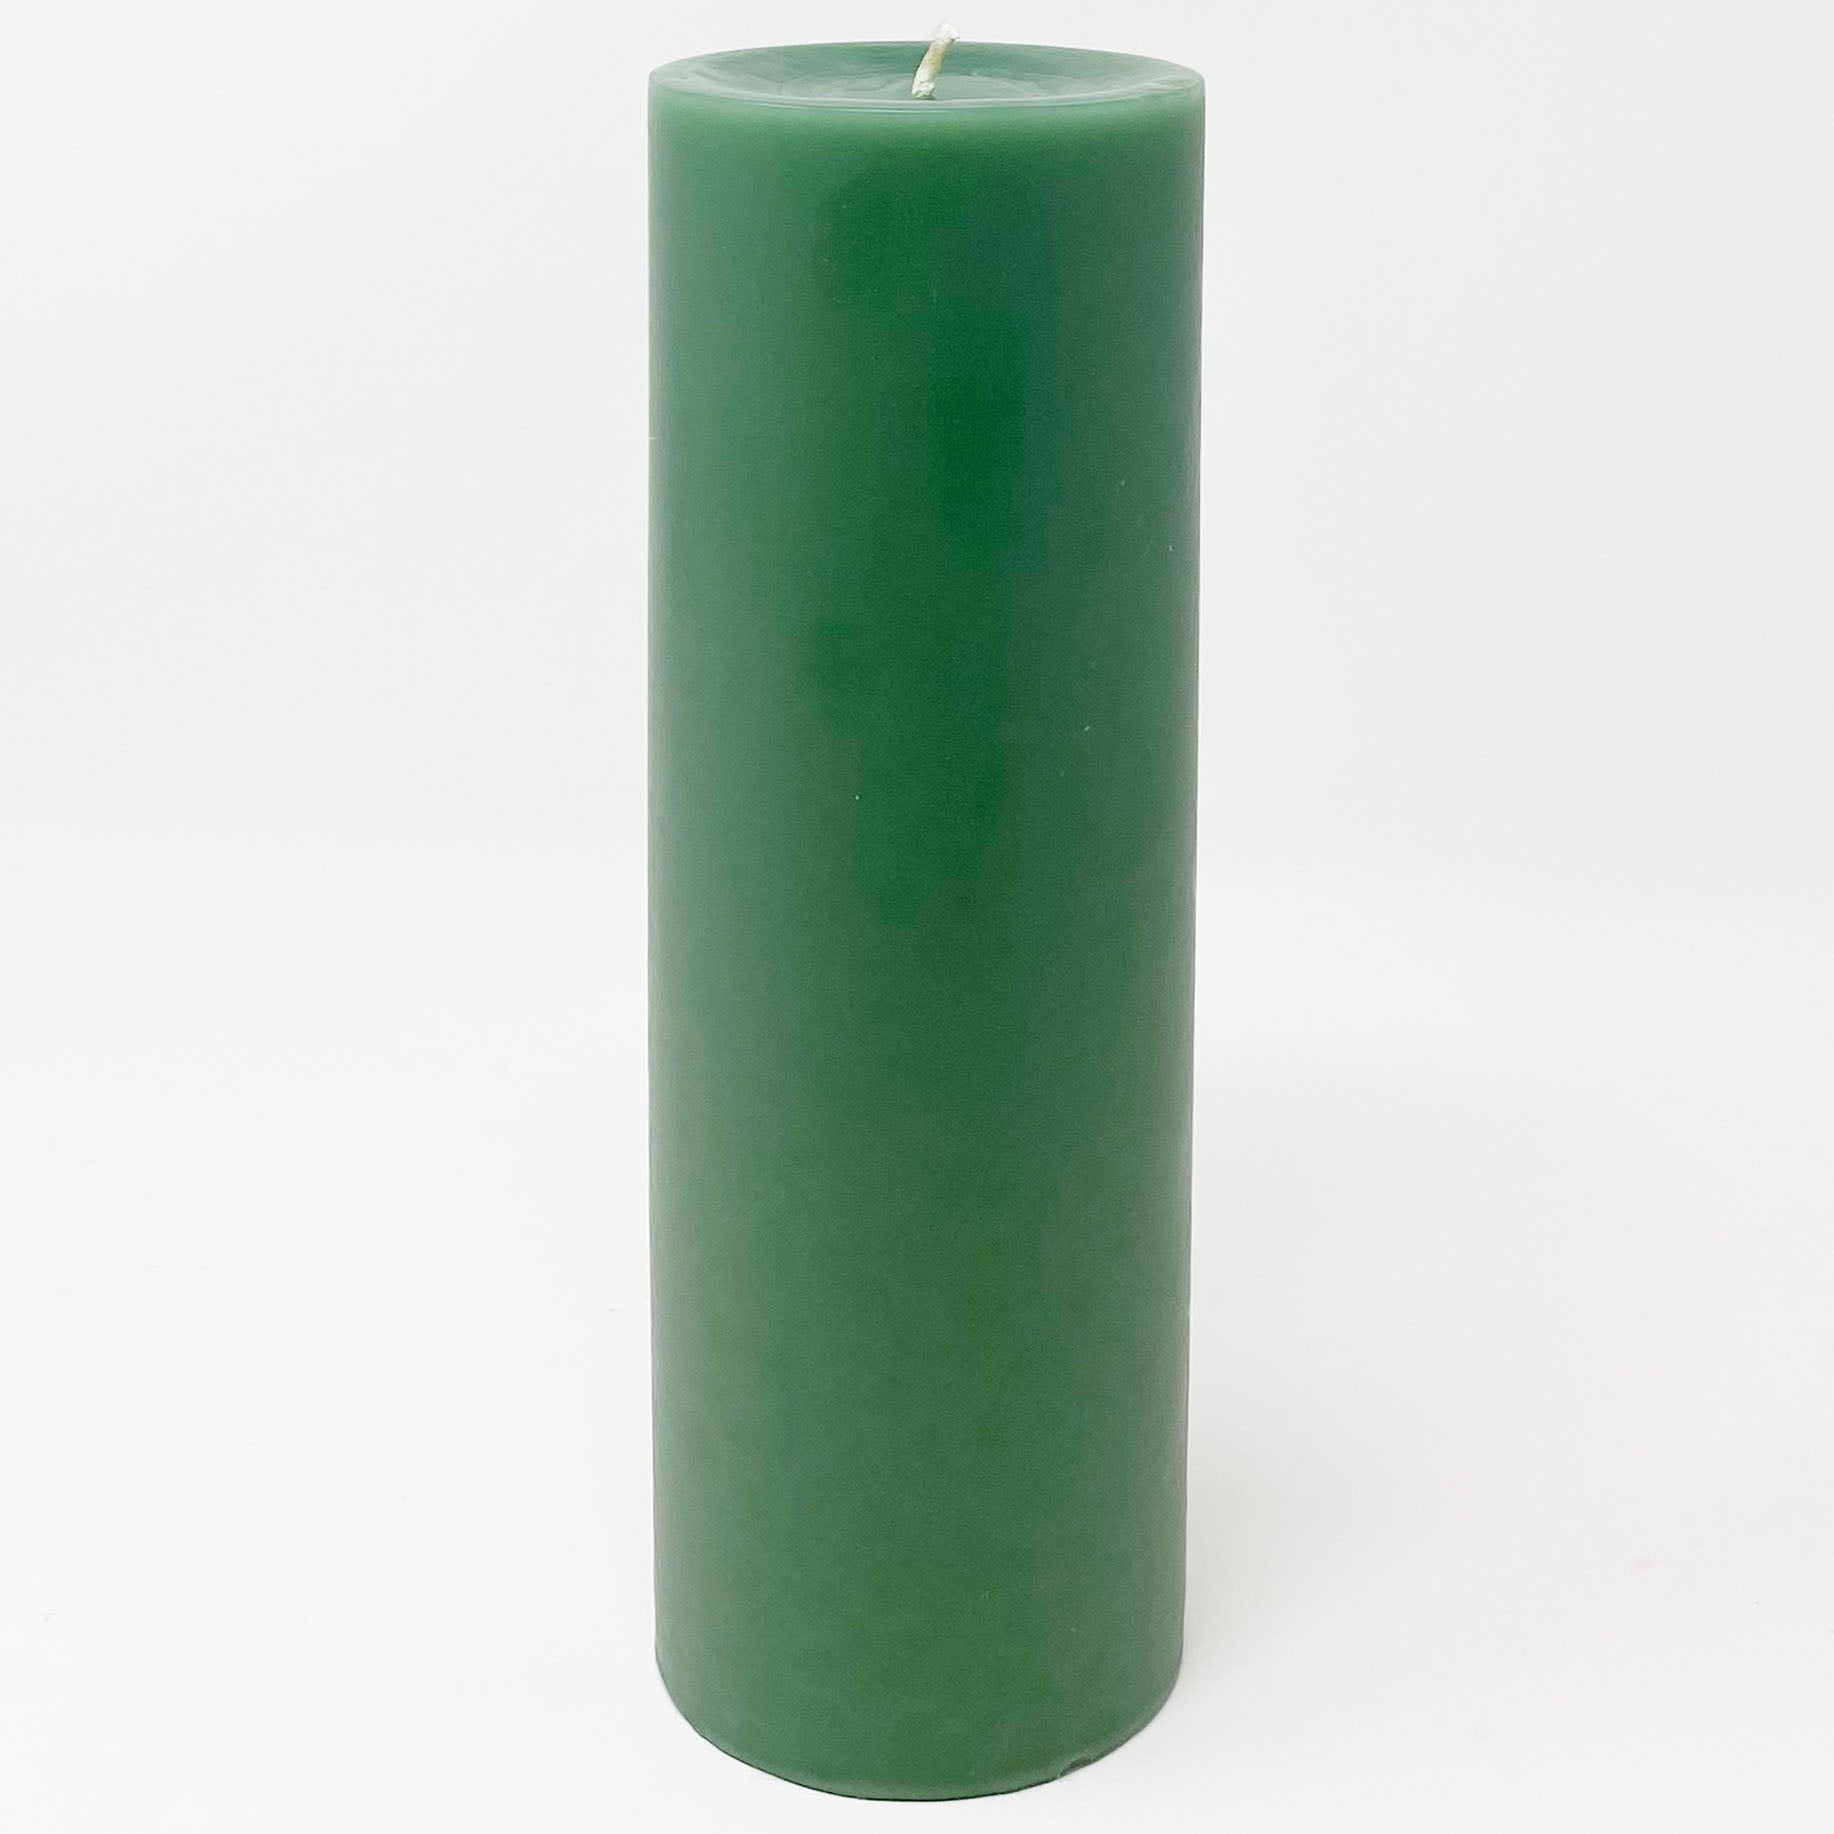 3x9" Colonial Green Pillar Candle